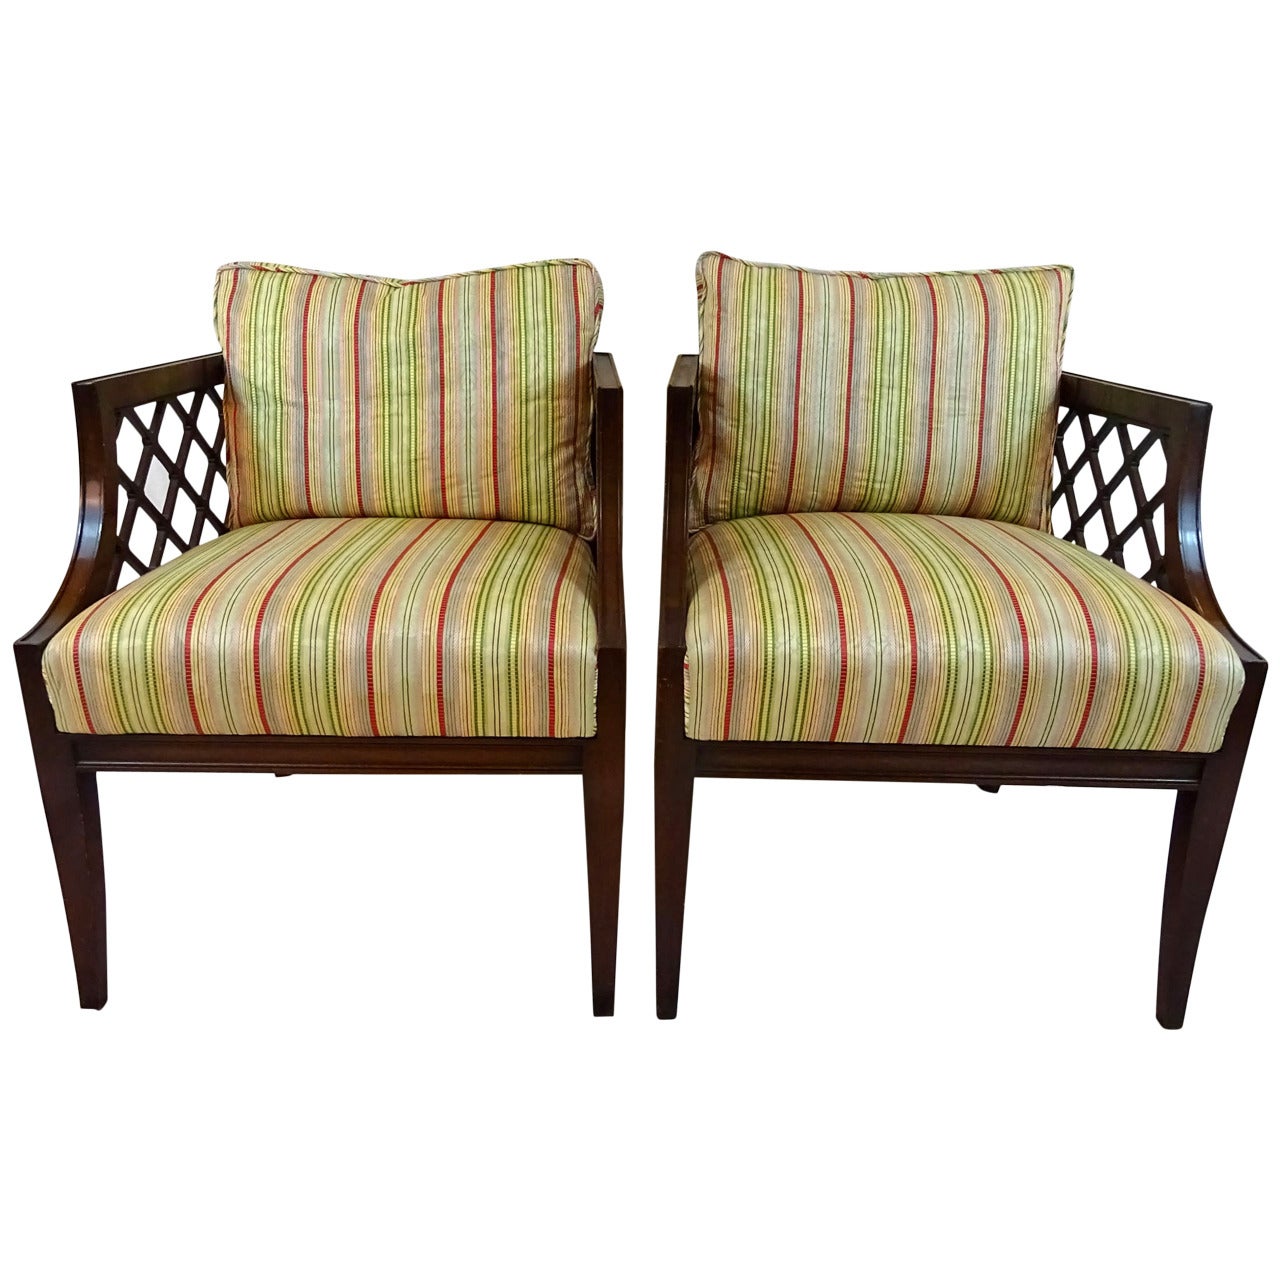 Pair of Mid-20th Century Mahogany Armchairs by Grosfeld House For Sale